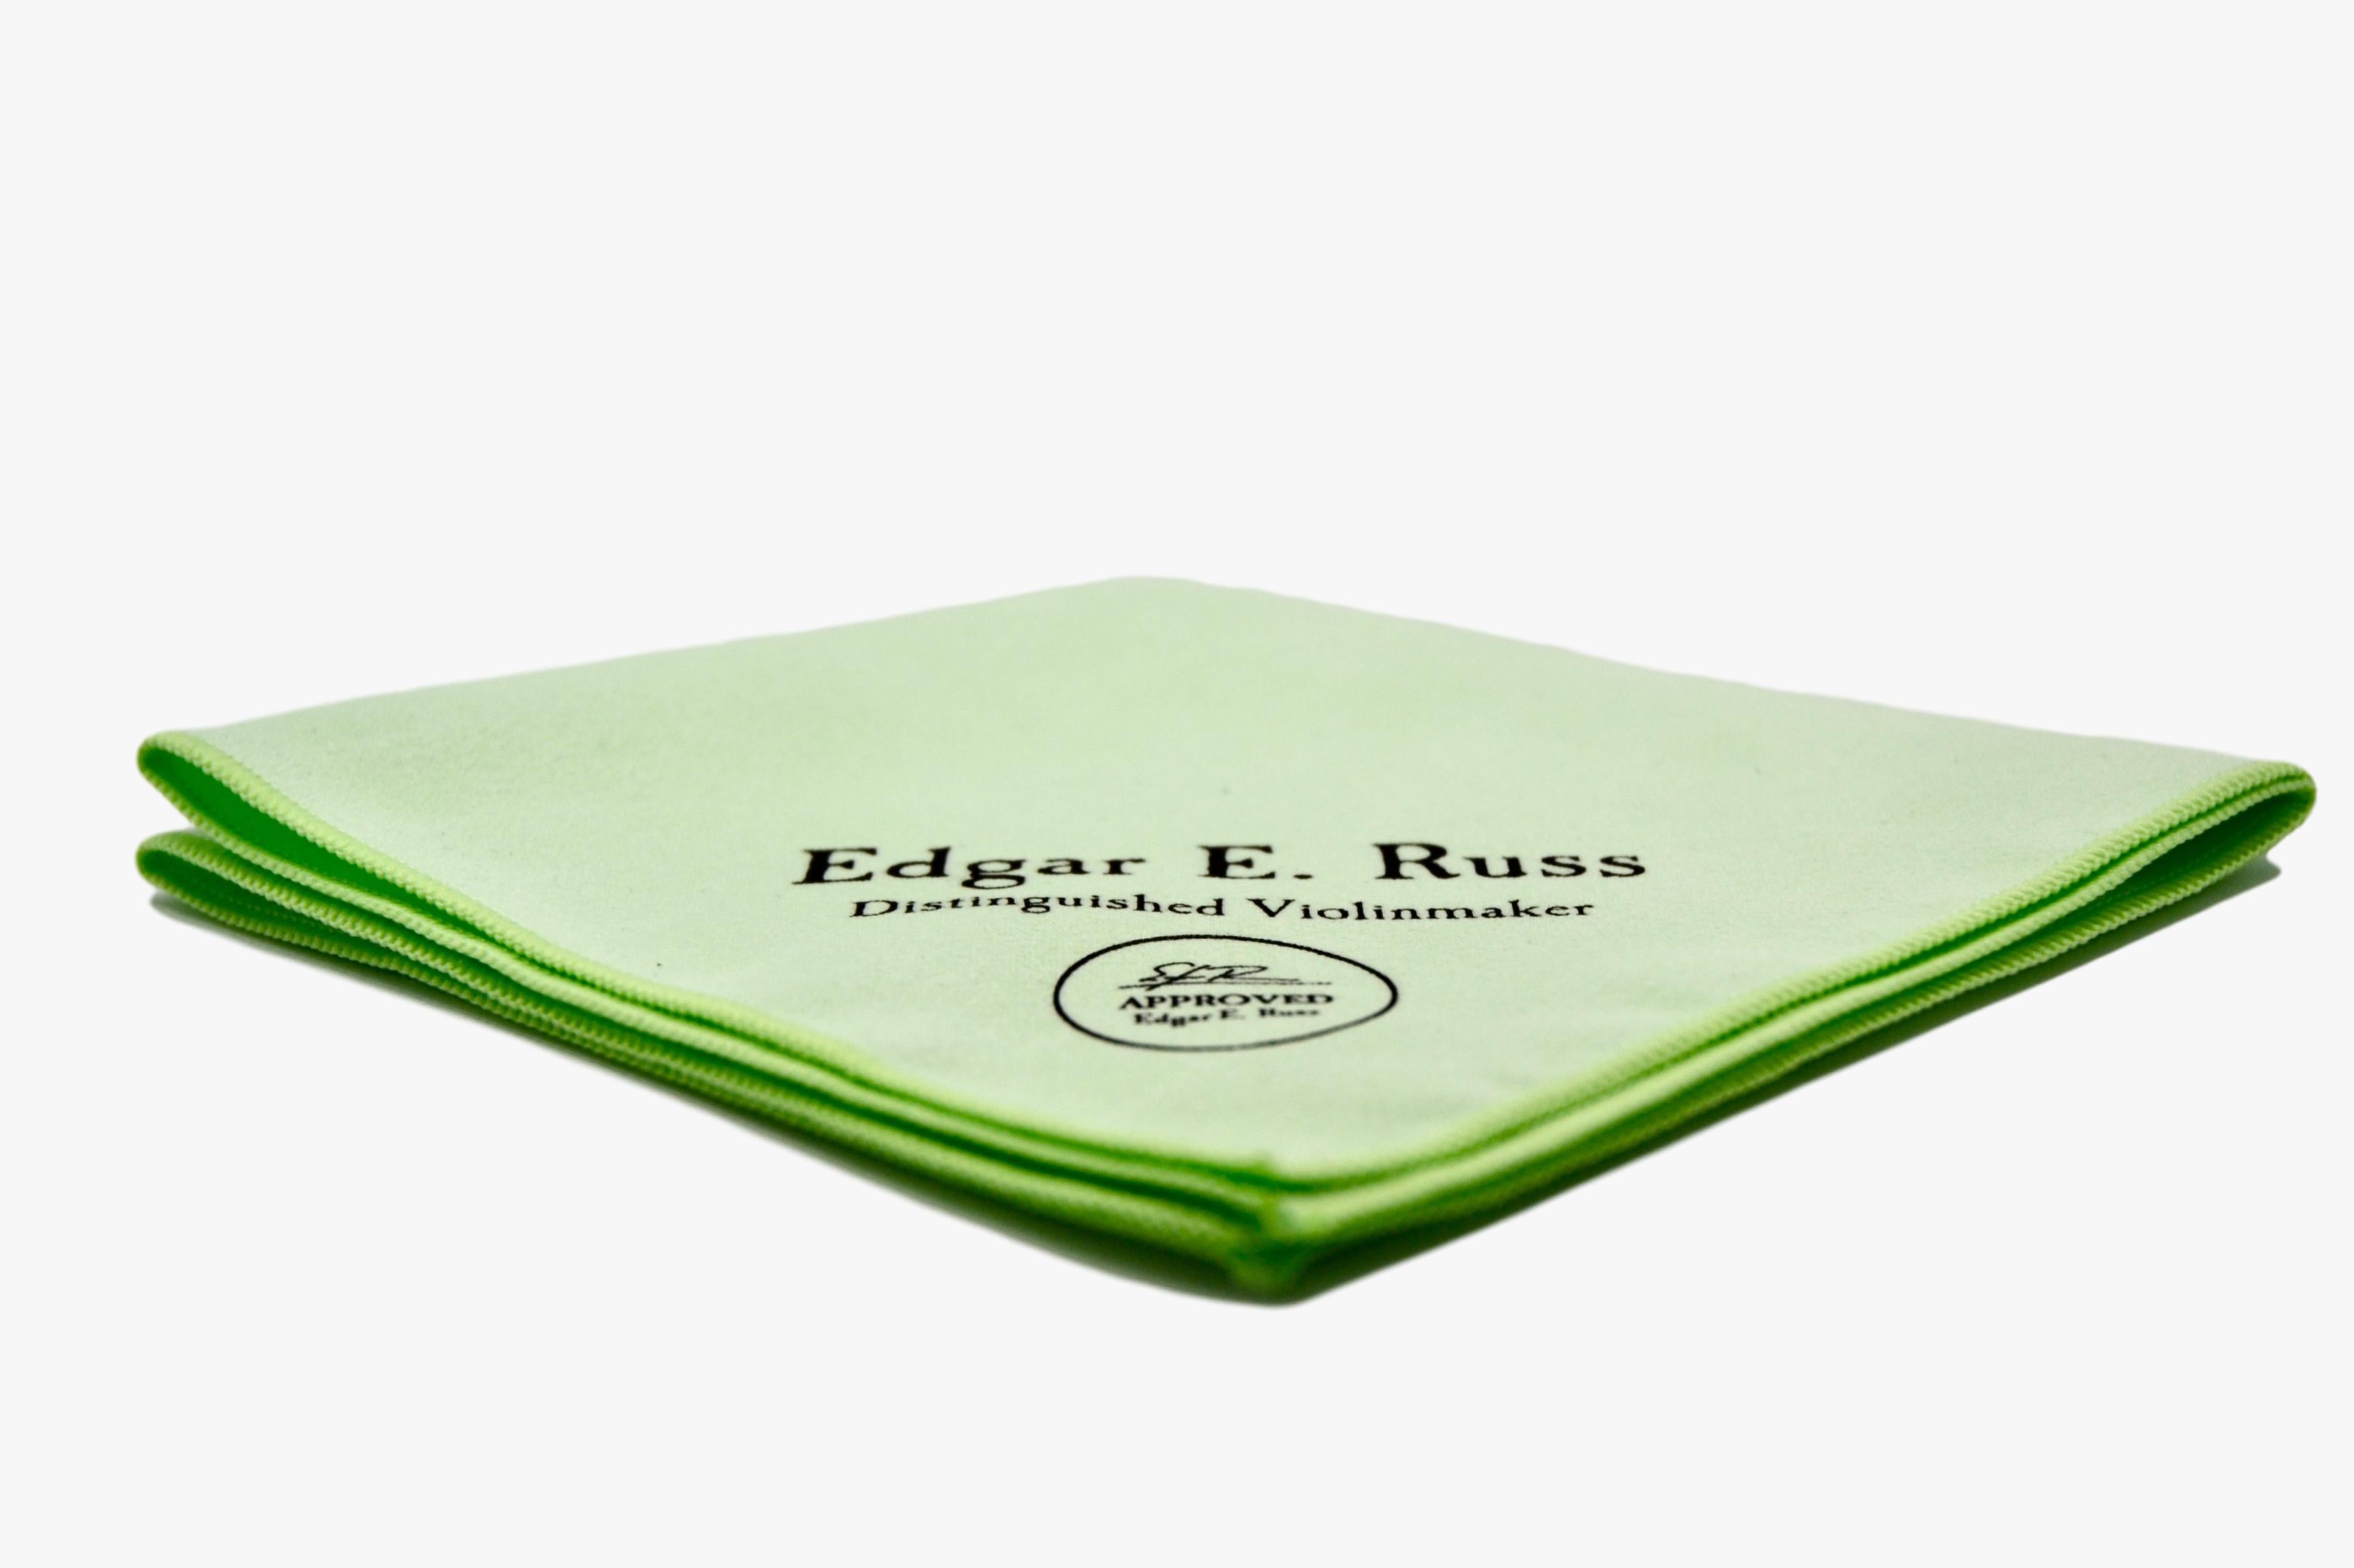 Edgar's Microfiber Cloth: a Gentle Touch for Your Instrument